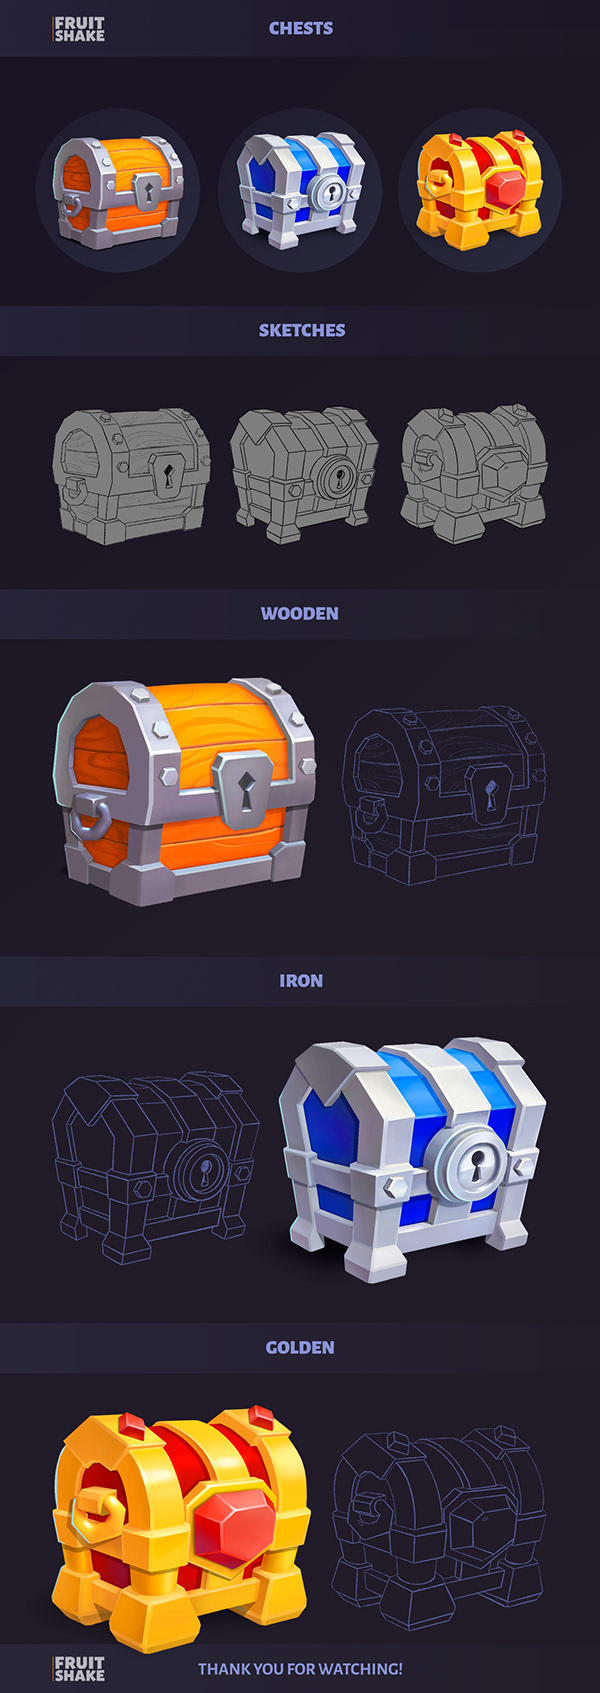 Treasure chests for game